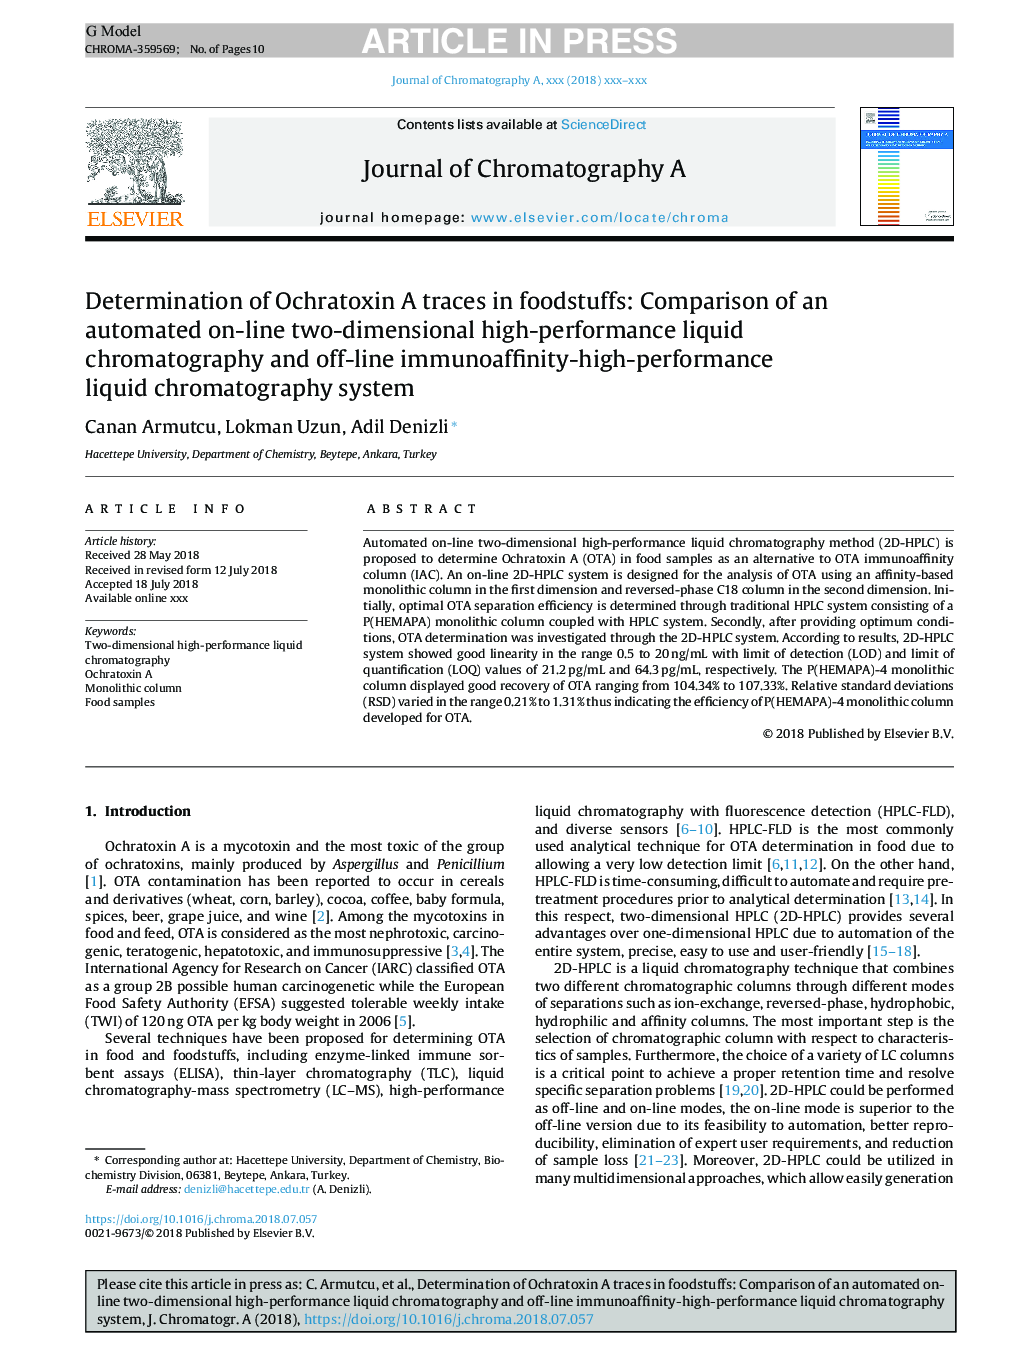 Determination of Ochratoxin A traces in foodstuffs: Comparison of an automated on-line two-dimensional high-performance liquid chromatography and off-line immunoaffinity-high-performance liquid chromatography system